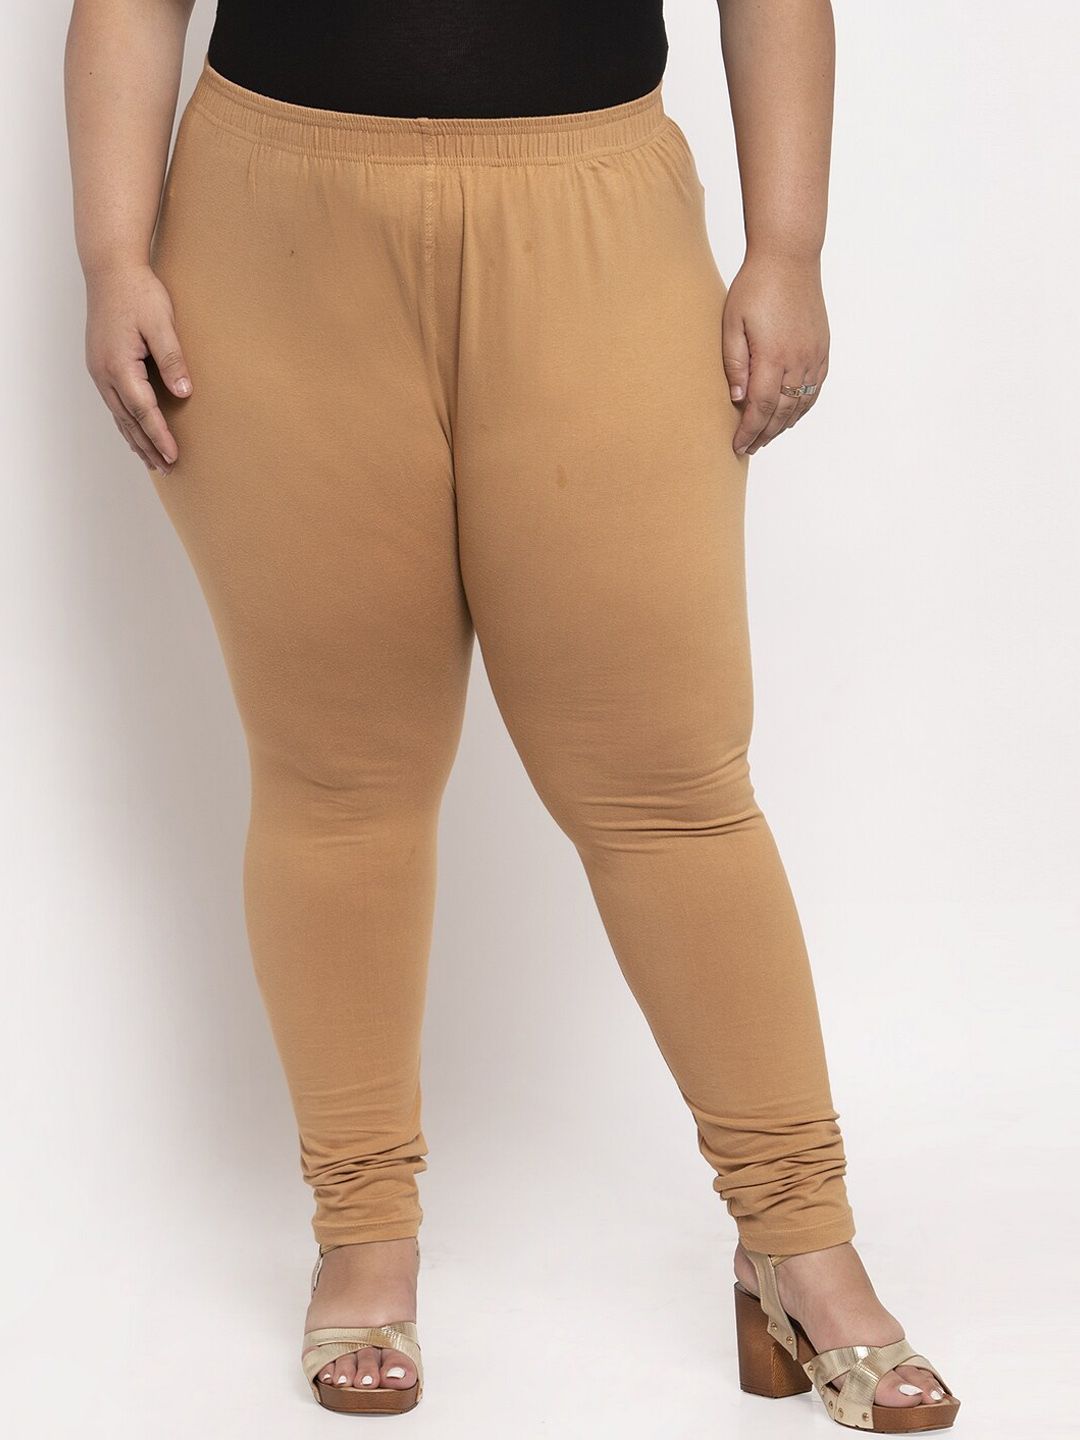 TAG 7 PLUS Women Solid Plus Size Beige Ankle Length Legging Price in India